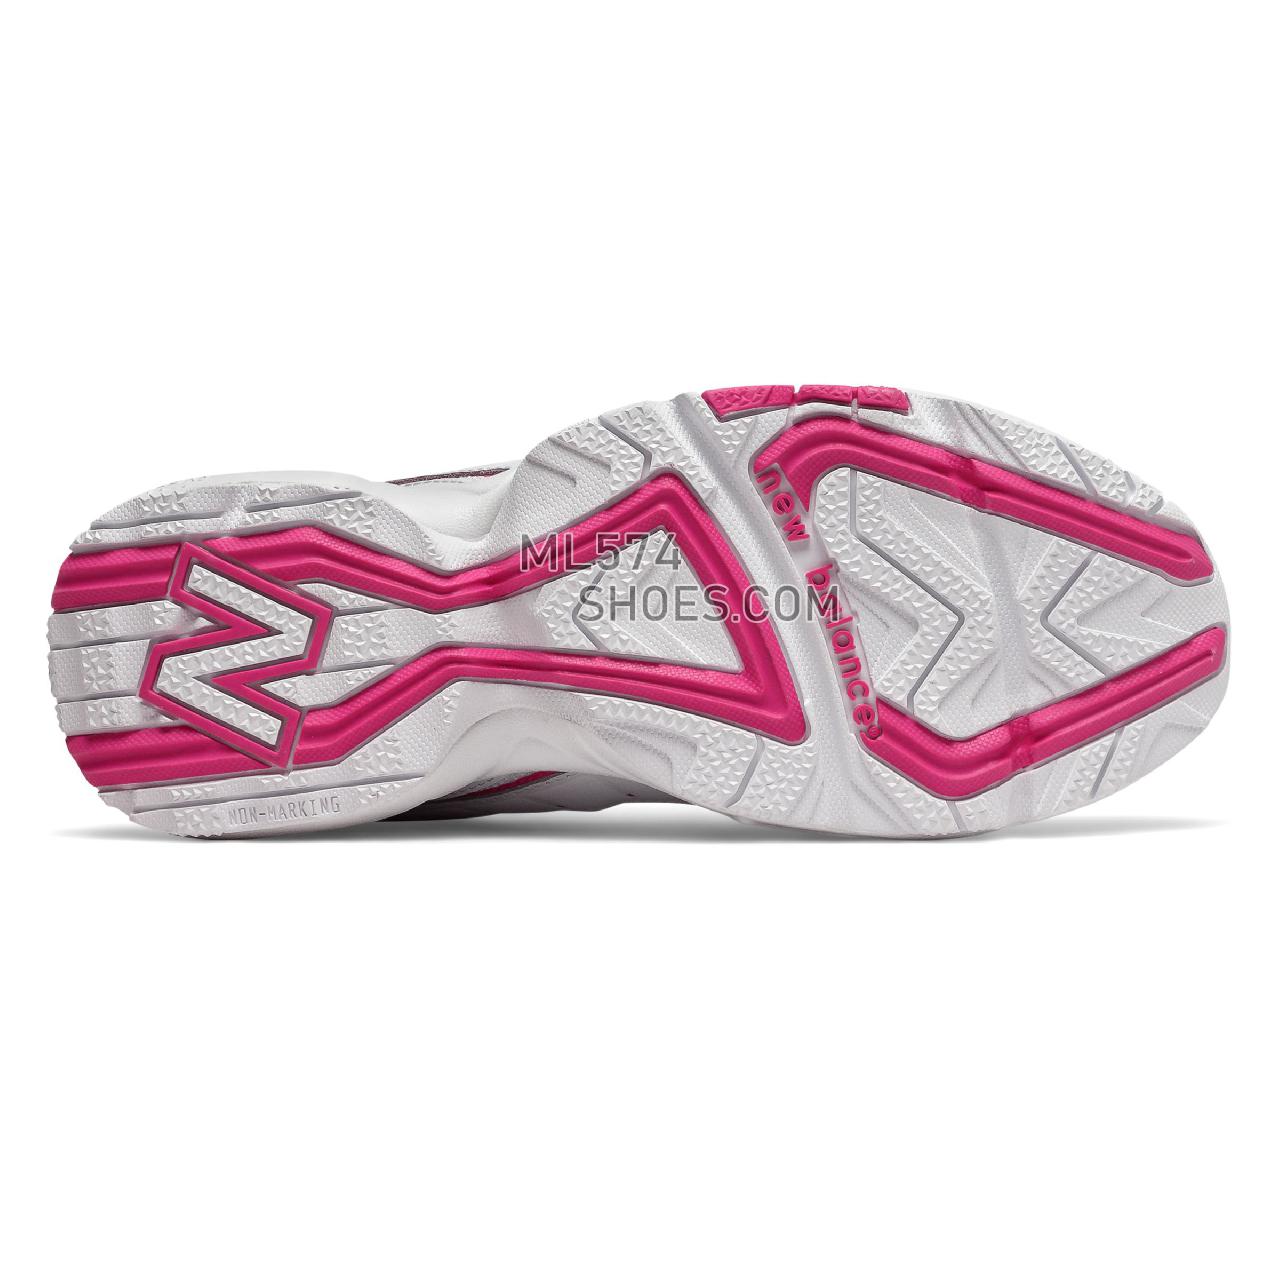 New Balance 452 - Men's 452 Training - White with Exuberant Pink and Vision Blue - MX452SC